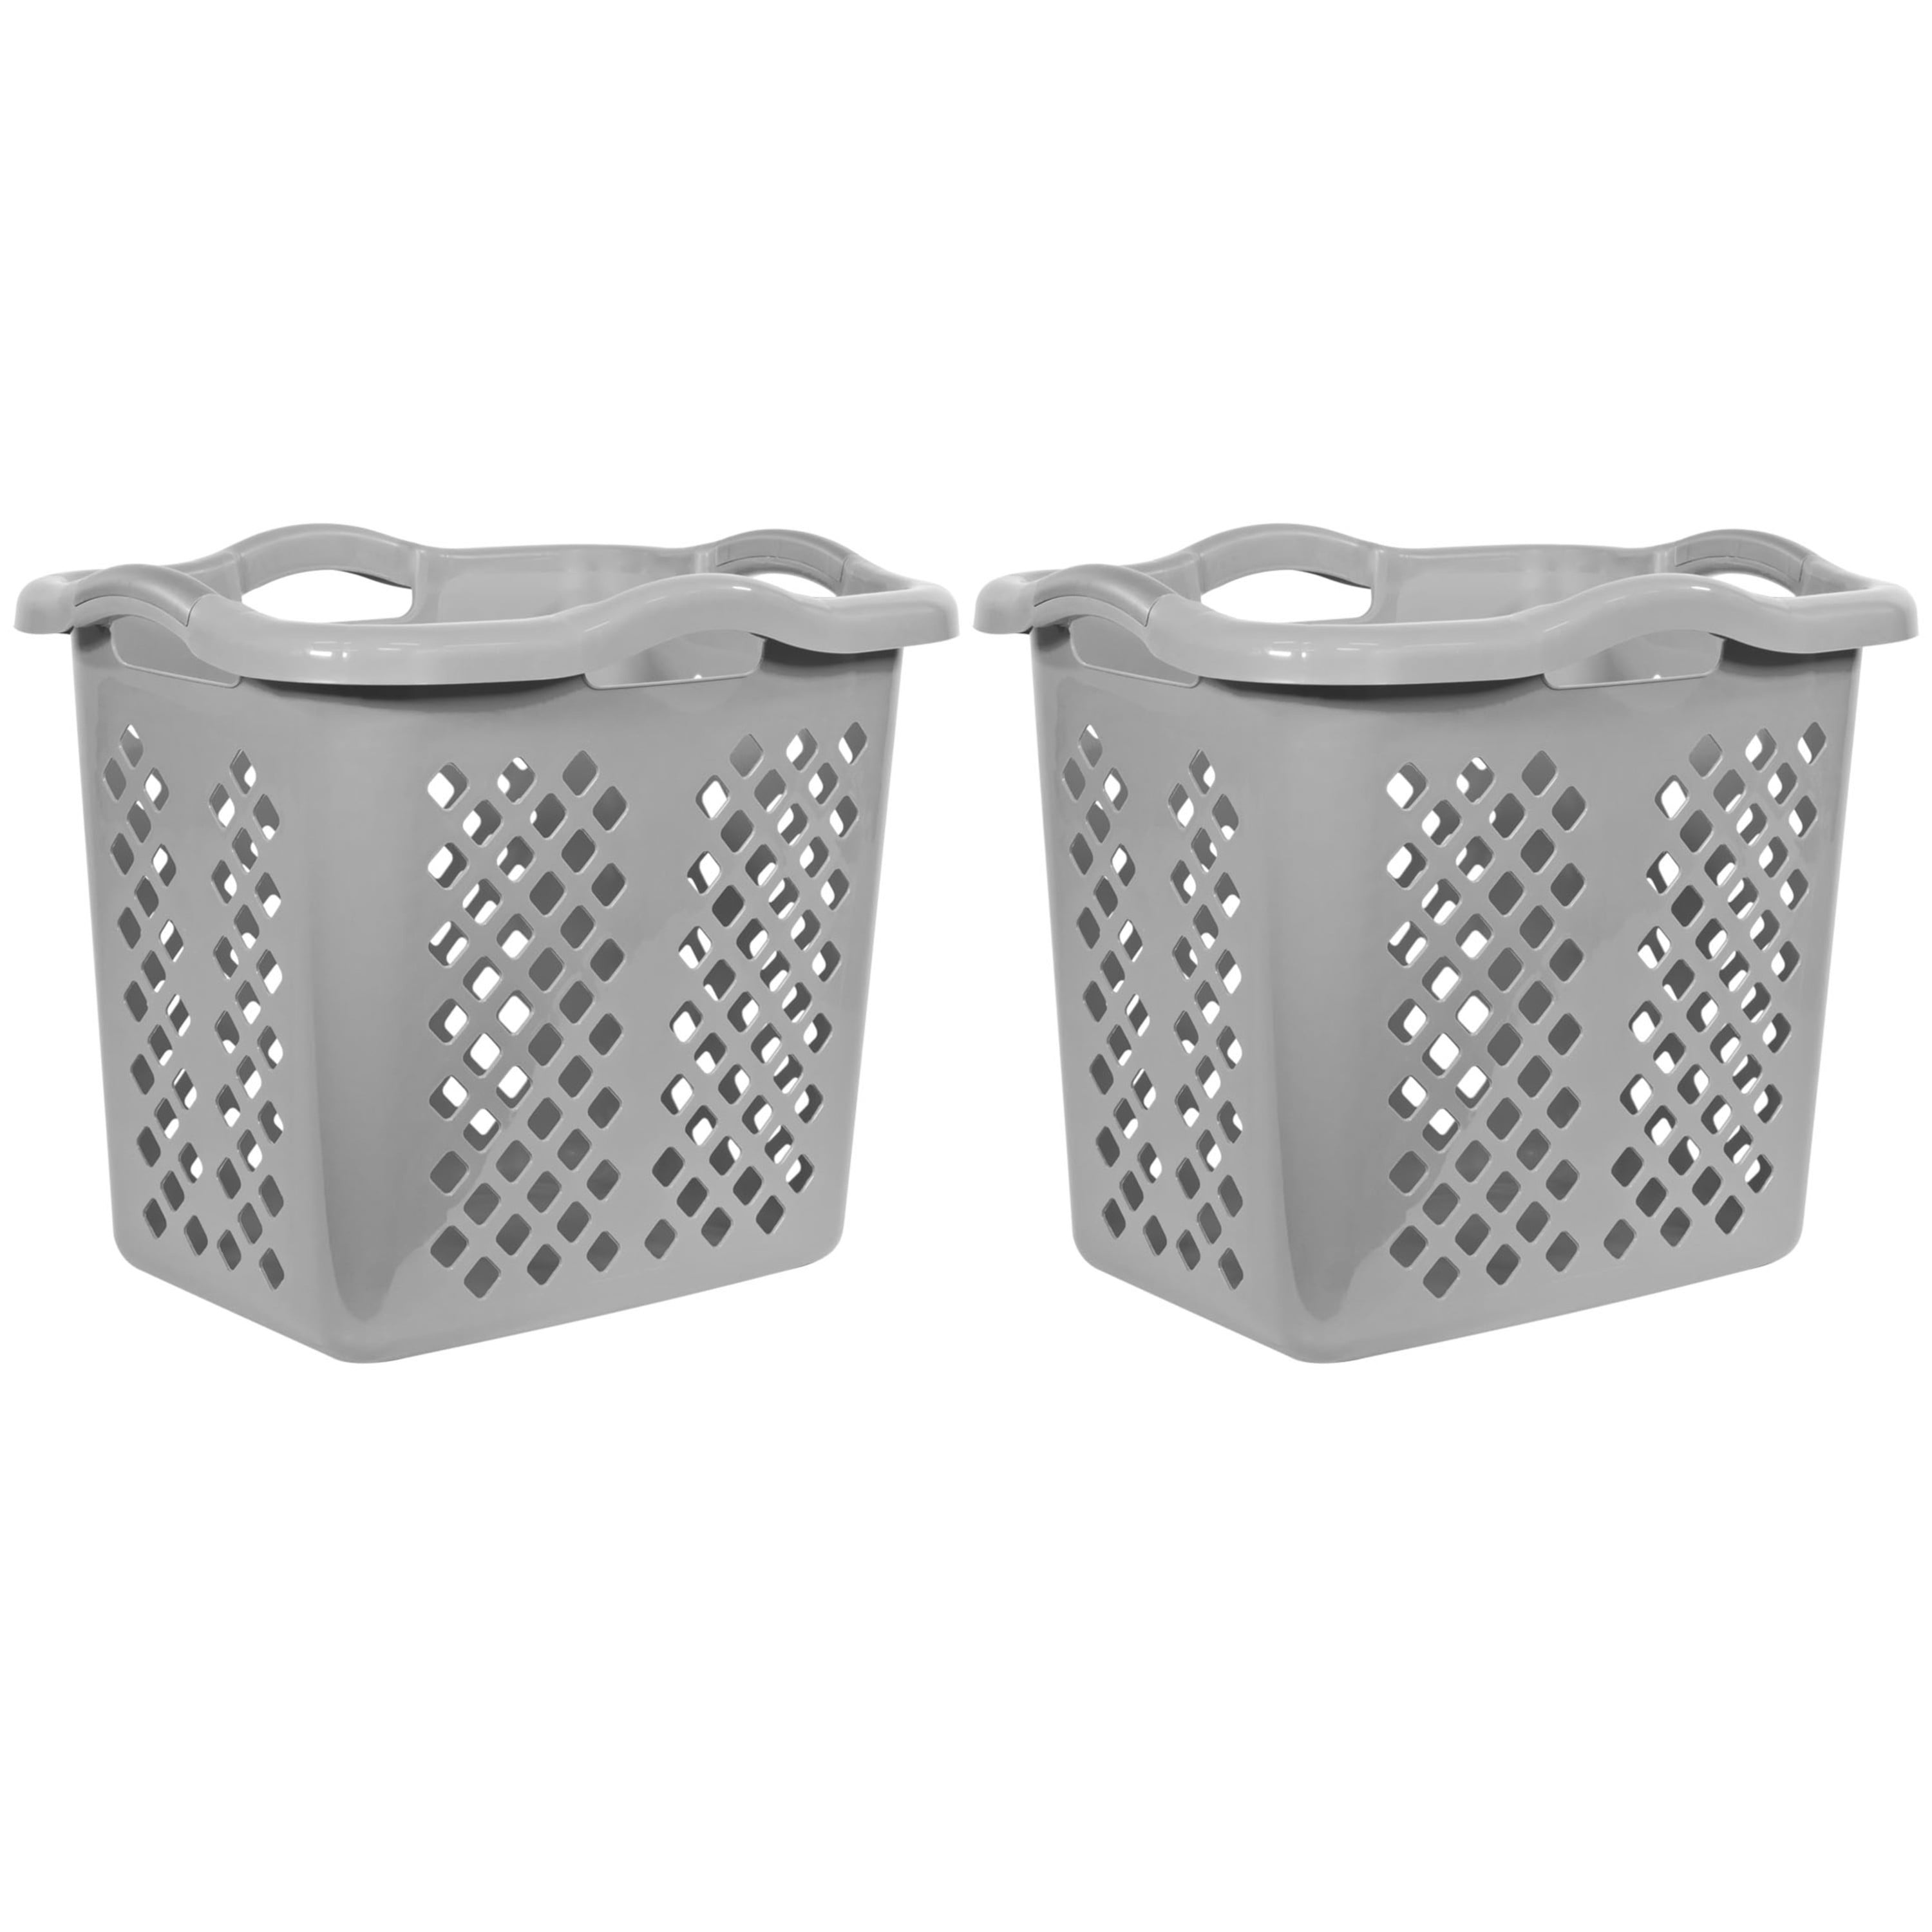 2-Pack Basics Linen Storage Basket with Handles Small